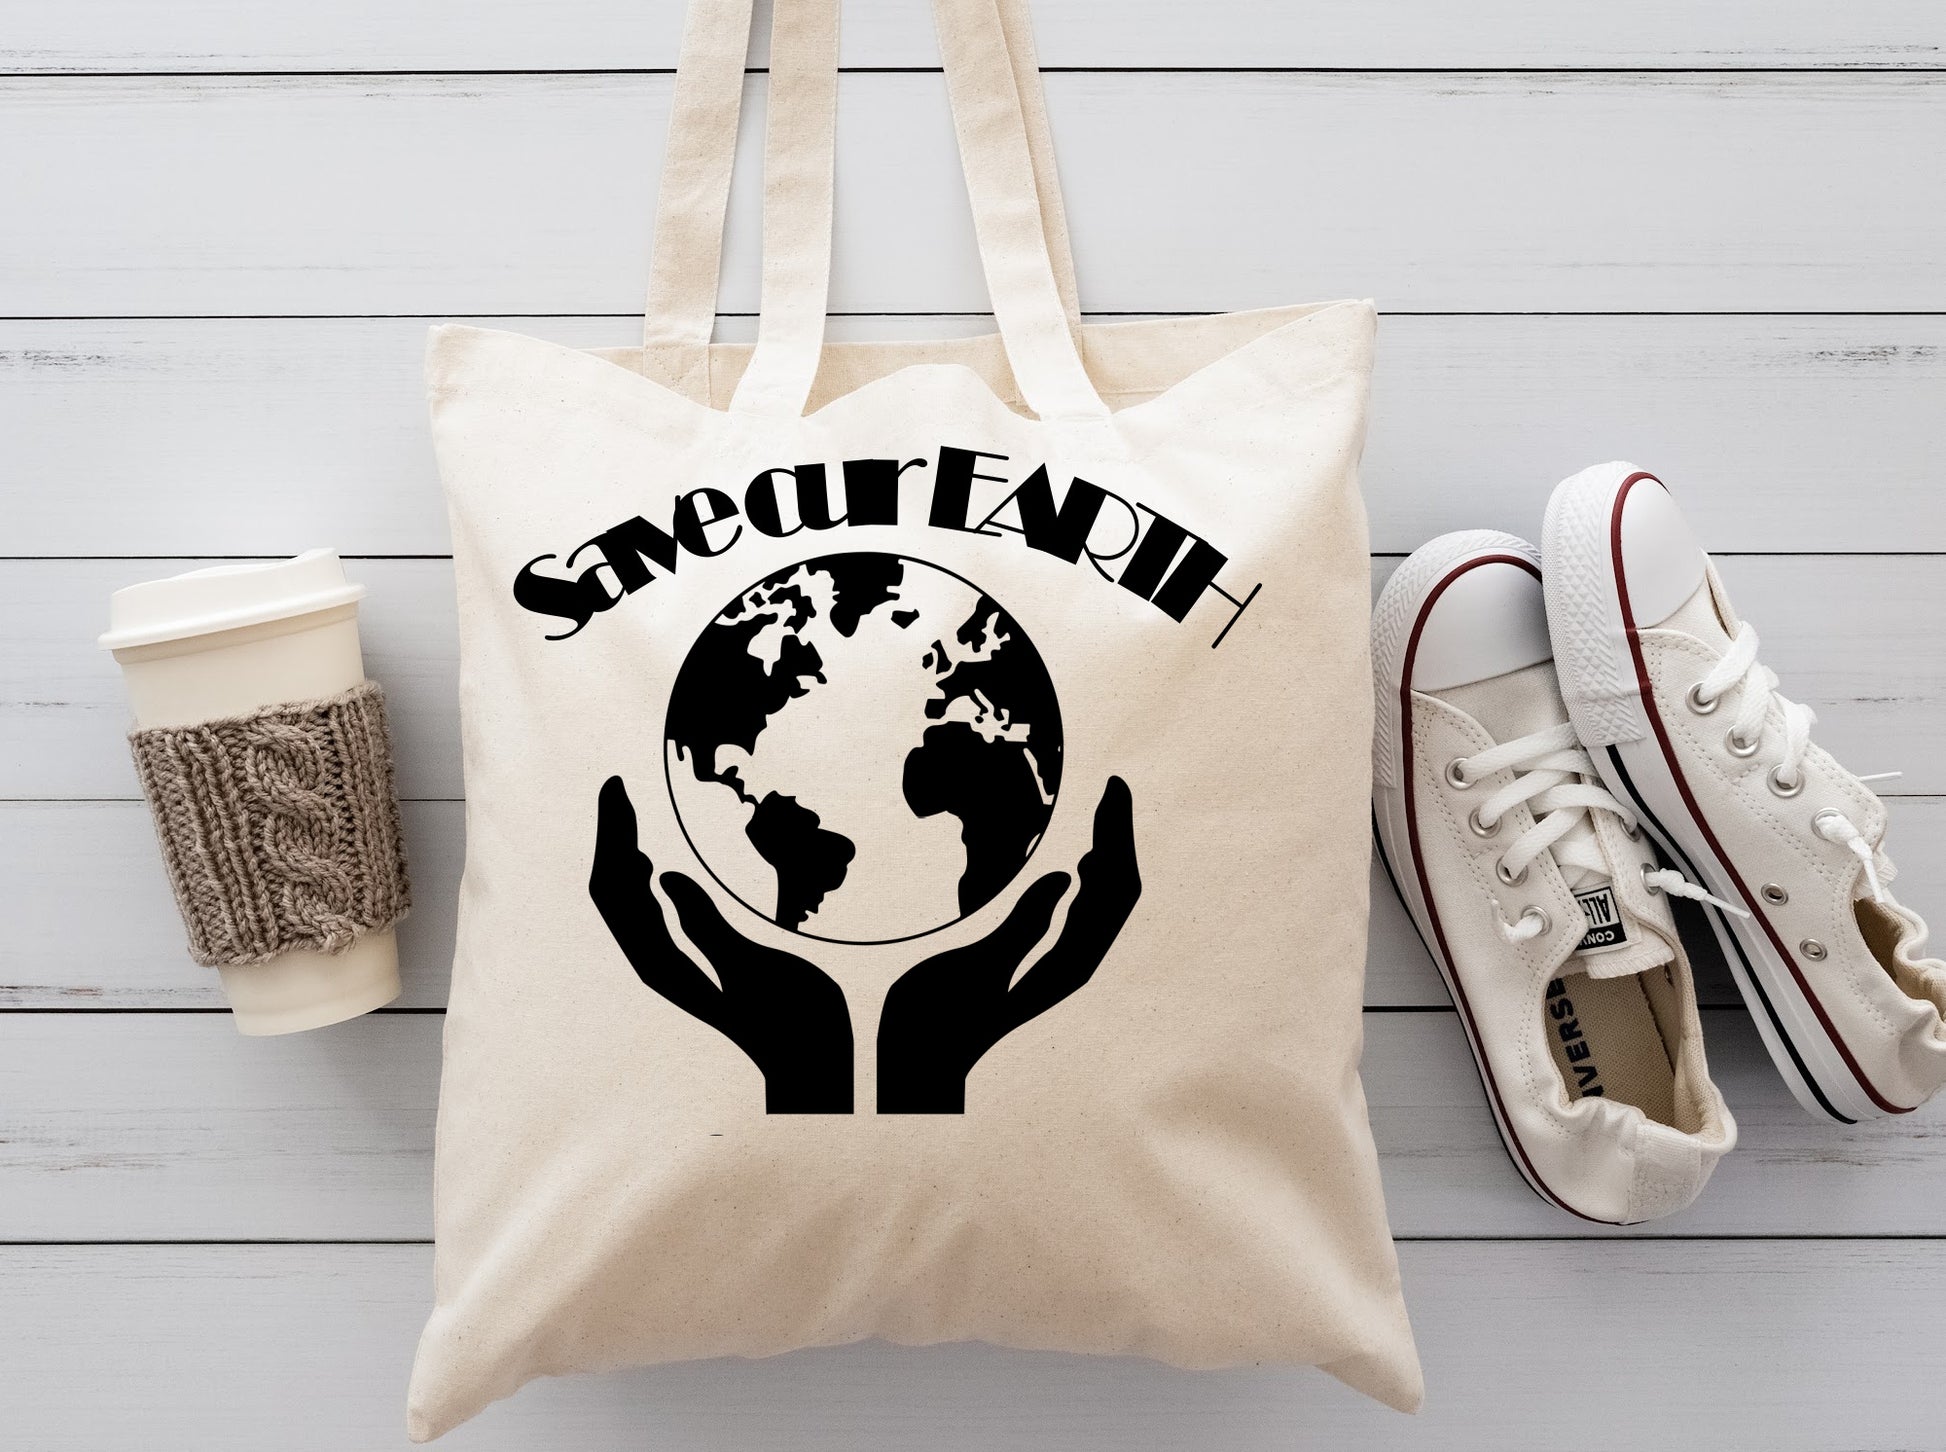 Cream colored fabric reusable tote bag with hands holding up the world